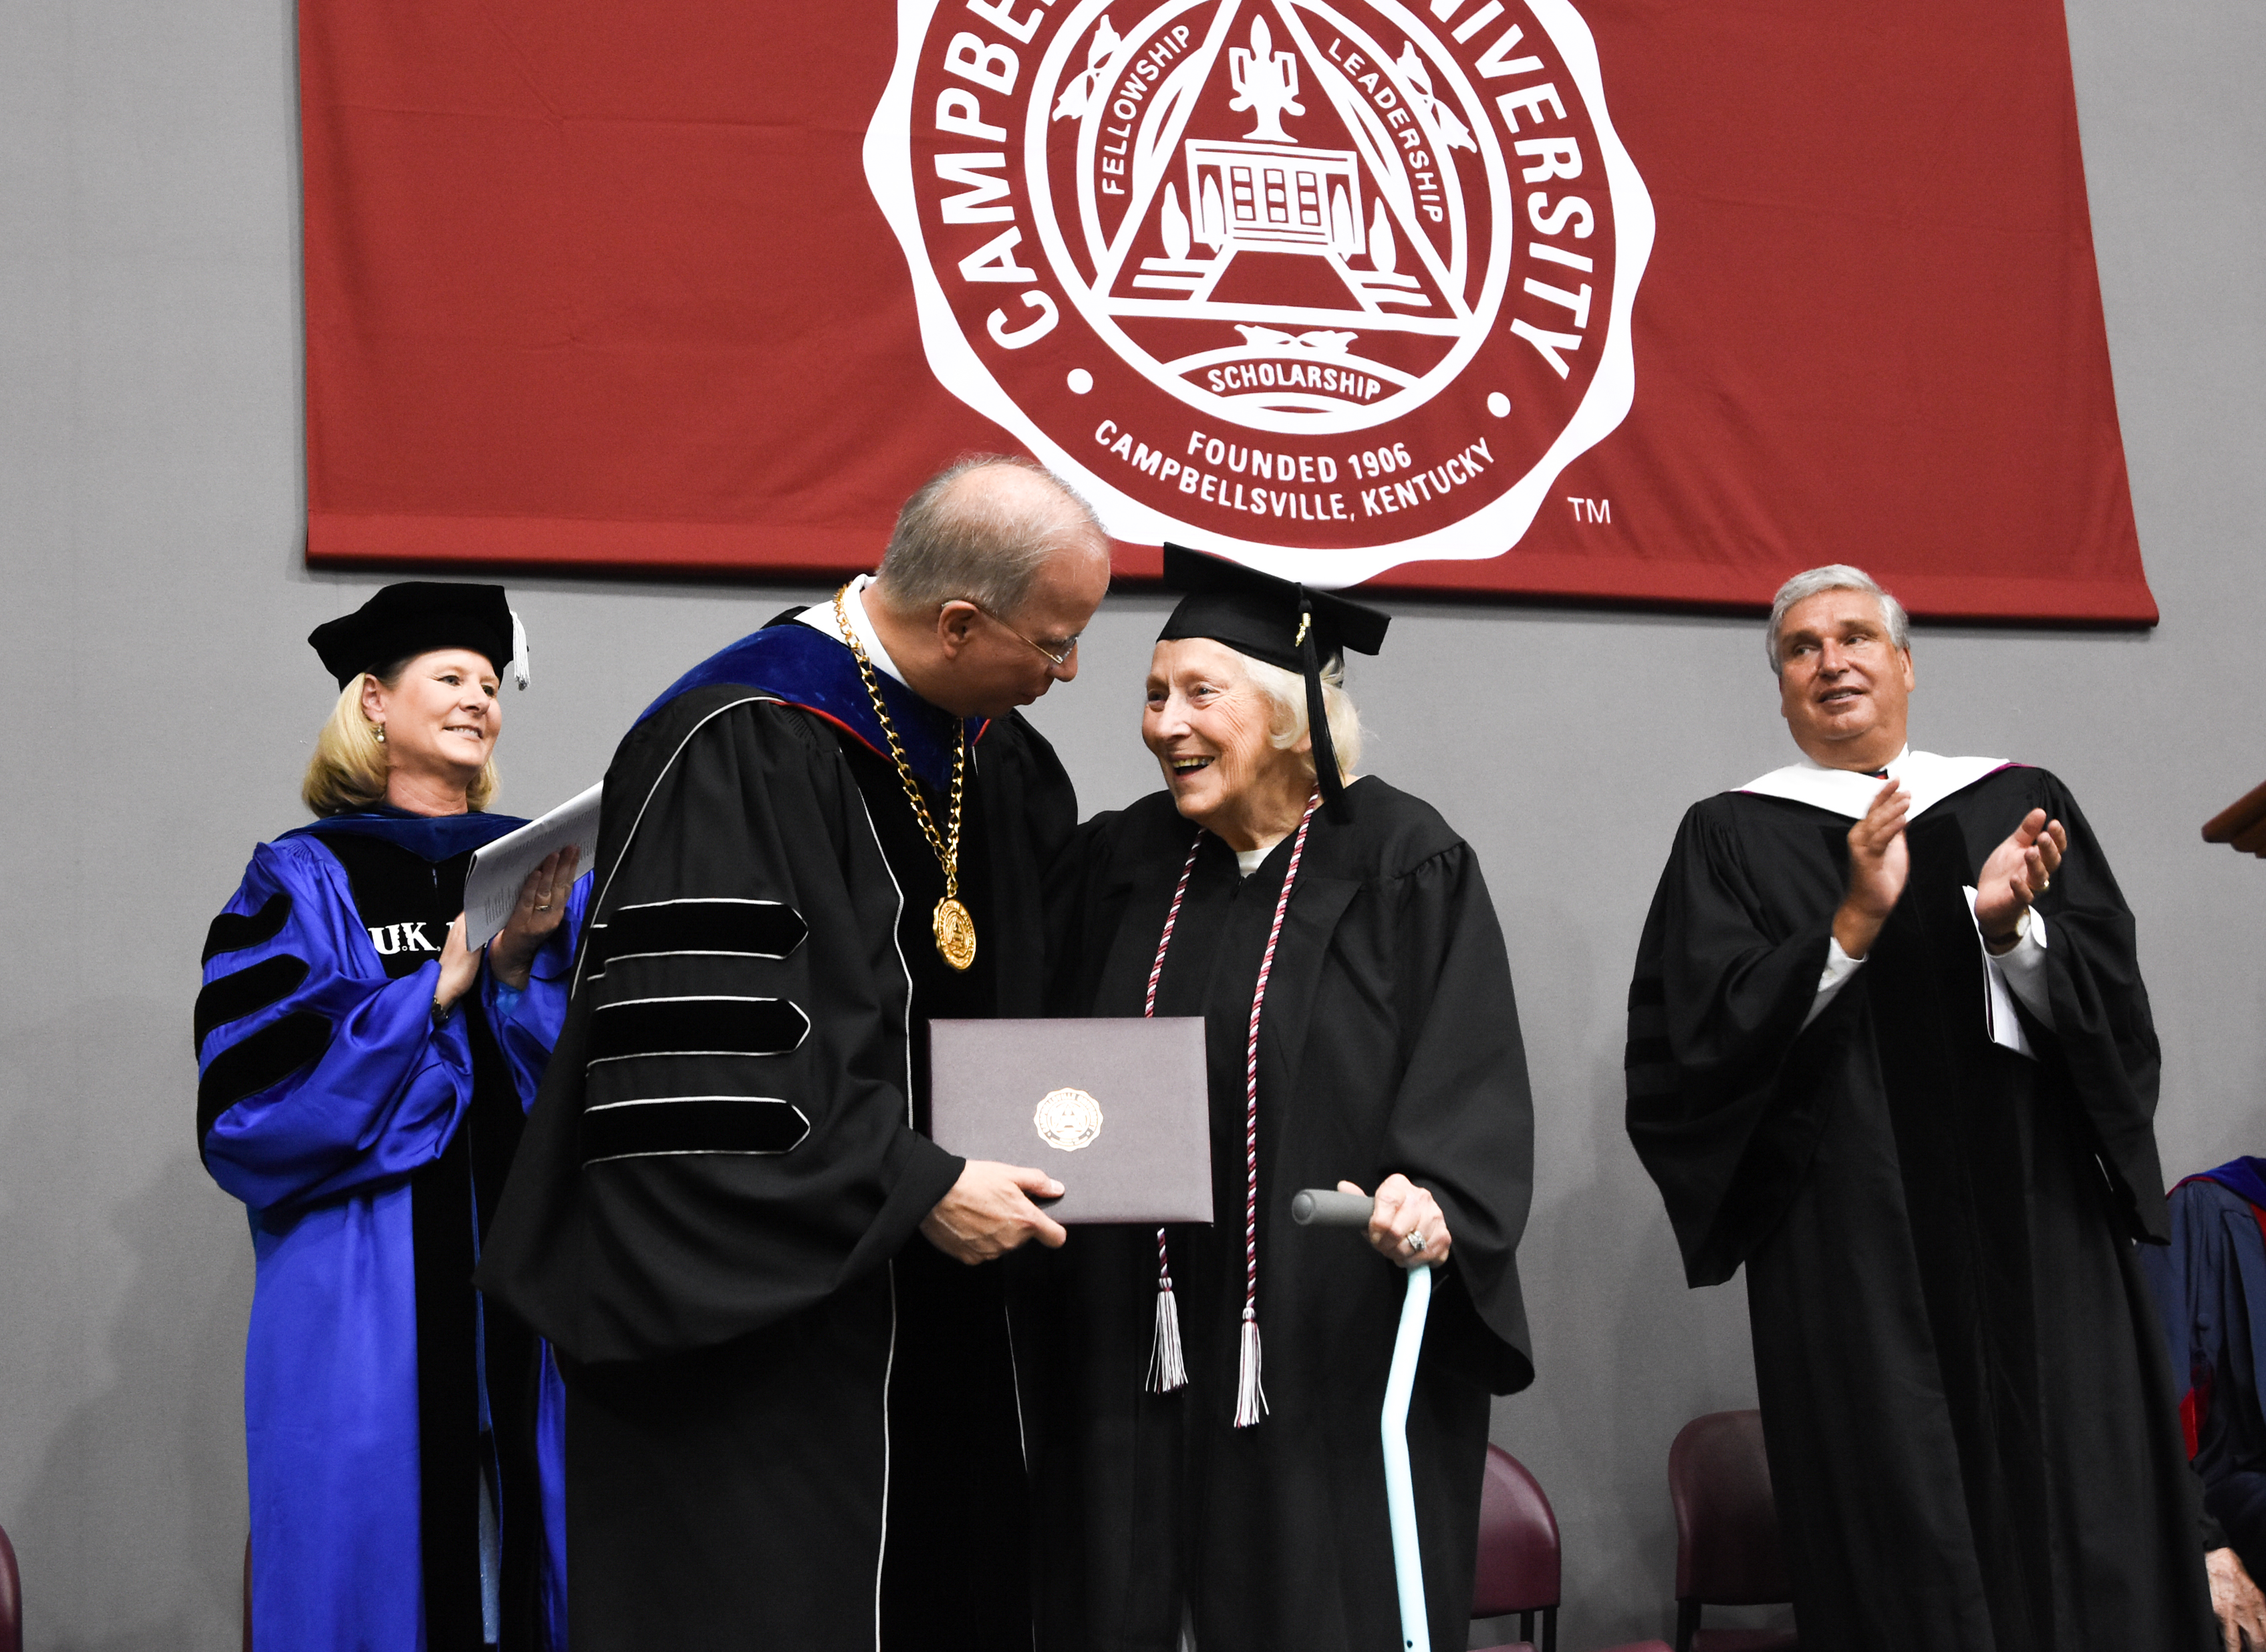 Katherine Mumaw Nally, 88, of Louisville, Ky., graduates with a Liberal Arts and Science degree, during the 9 a.m. commencement at Campbellsville University. She was recently named Courier-Journal Mother of the Year. (Campbellsville University Photo by Joshua Williams)